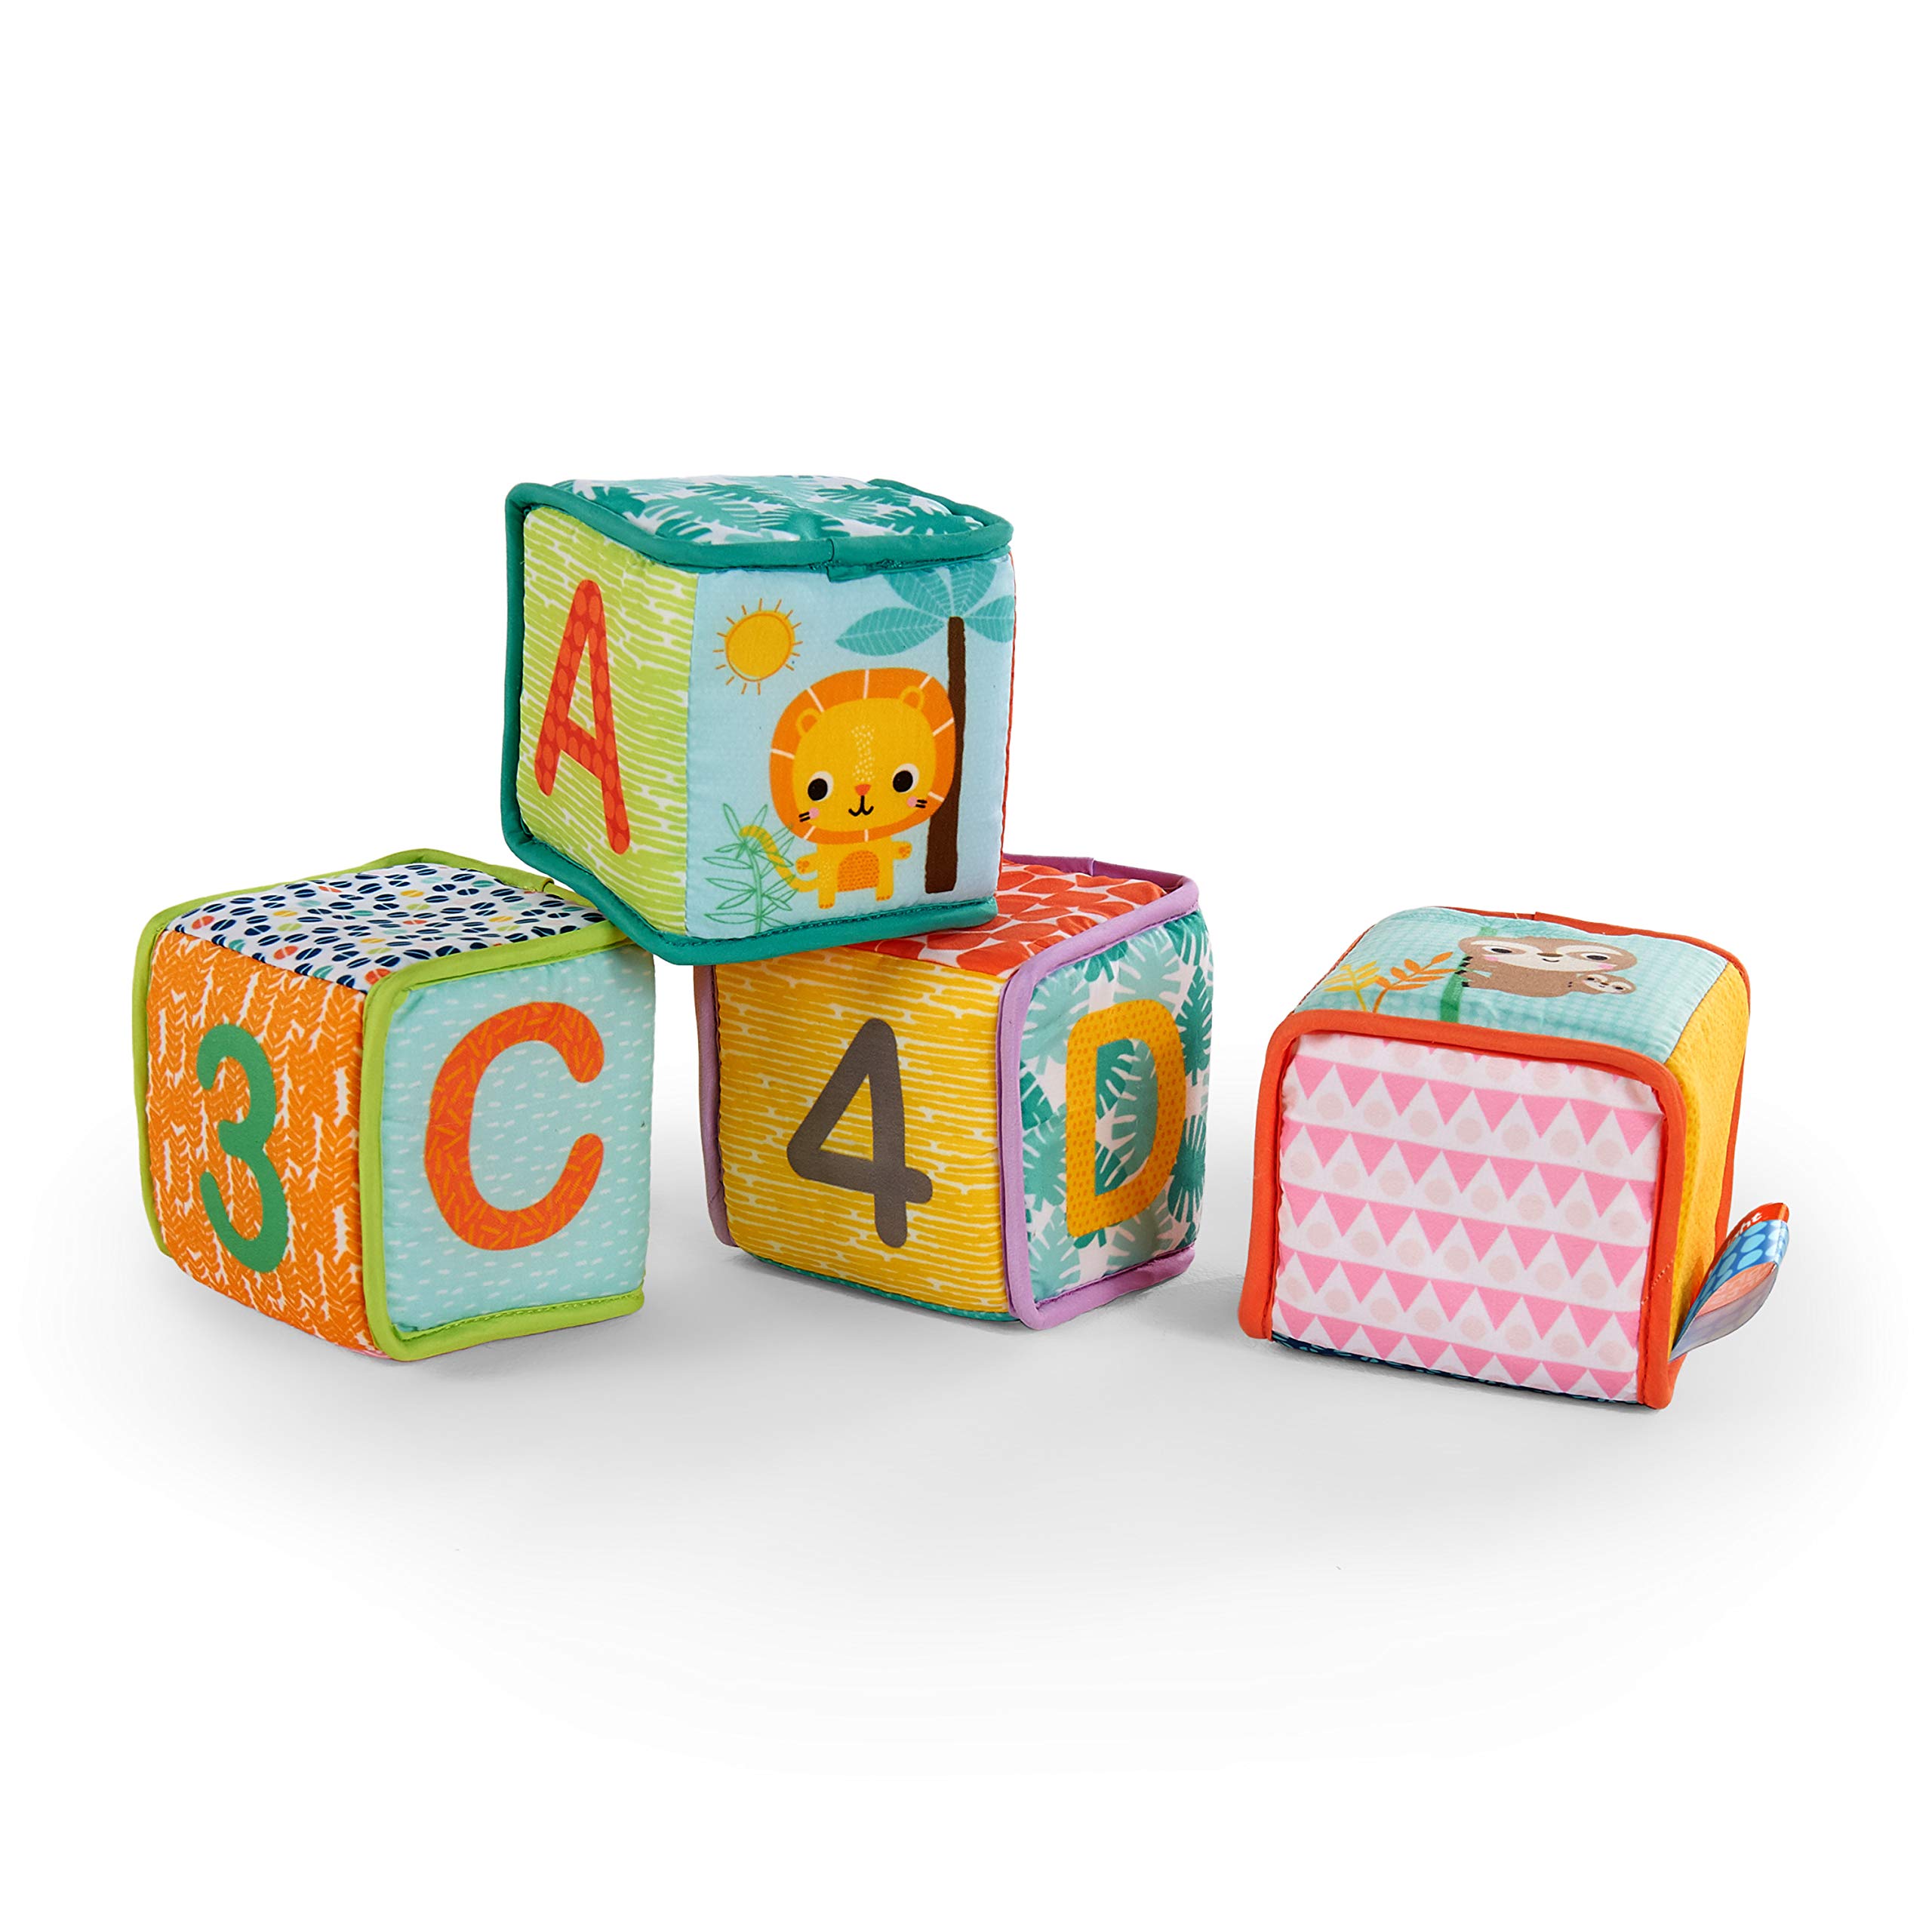 Momobebe Soft Block with 8 Sides (Alphabets, Animals and Numbers prints)